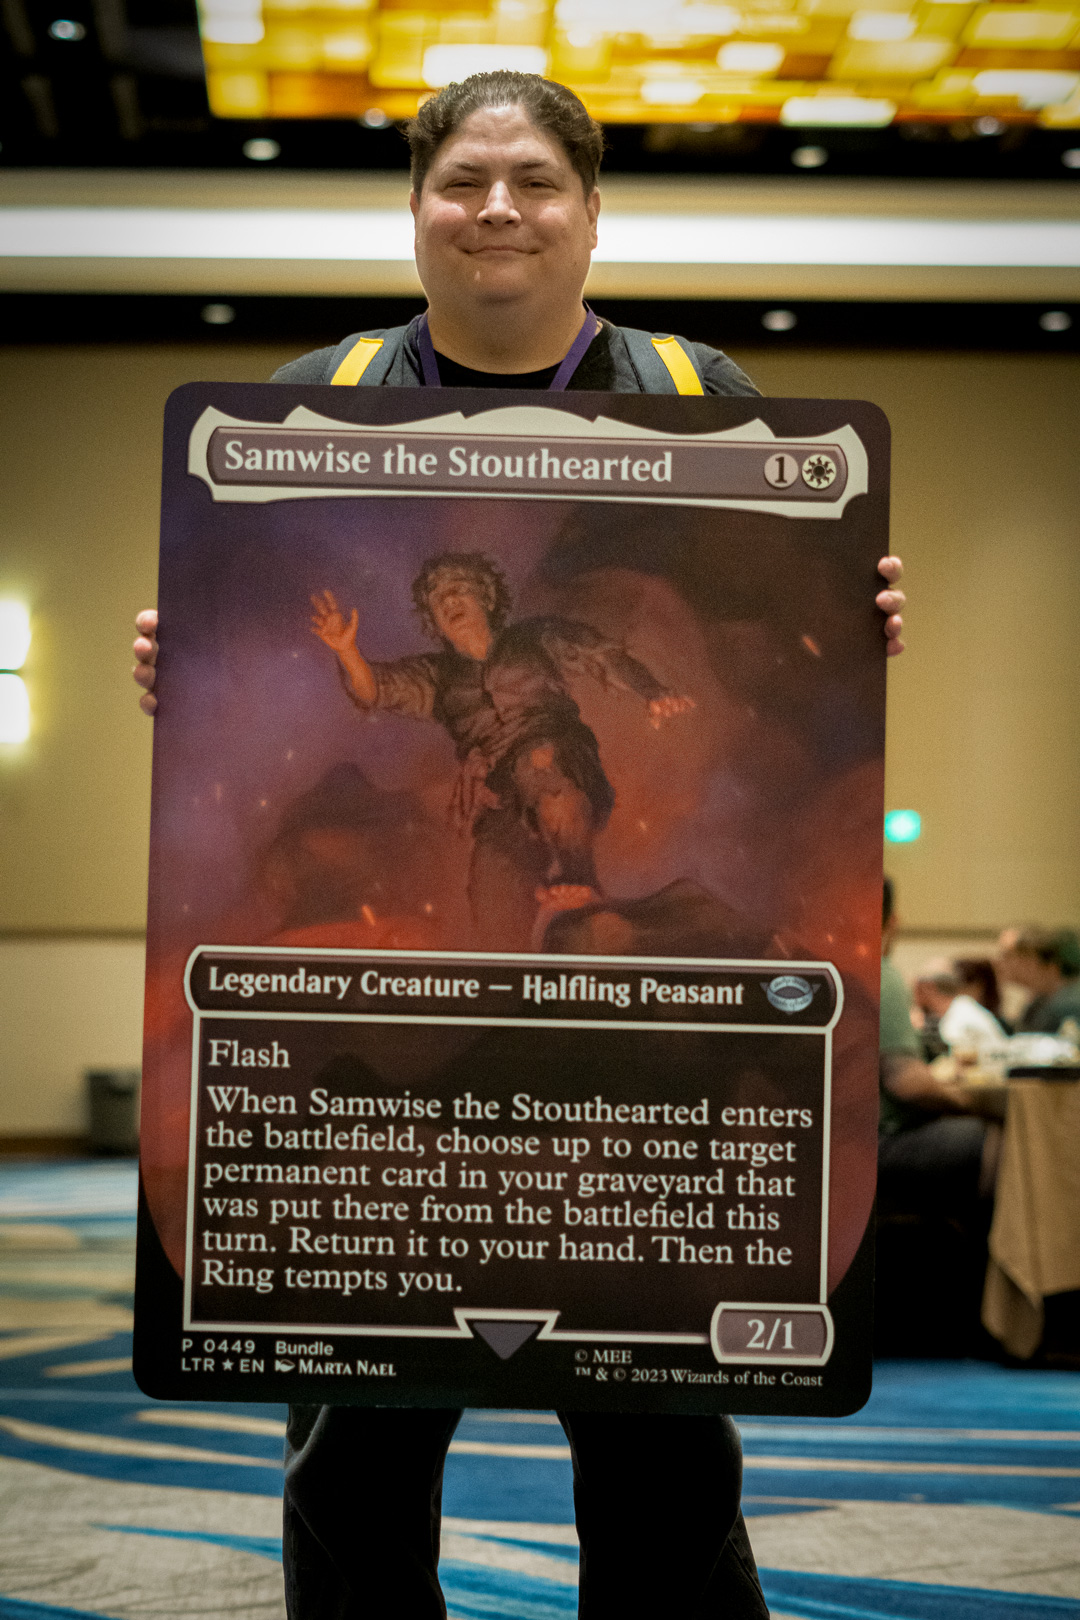 Player holding an oversized card of Samwise the Stouthearted